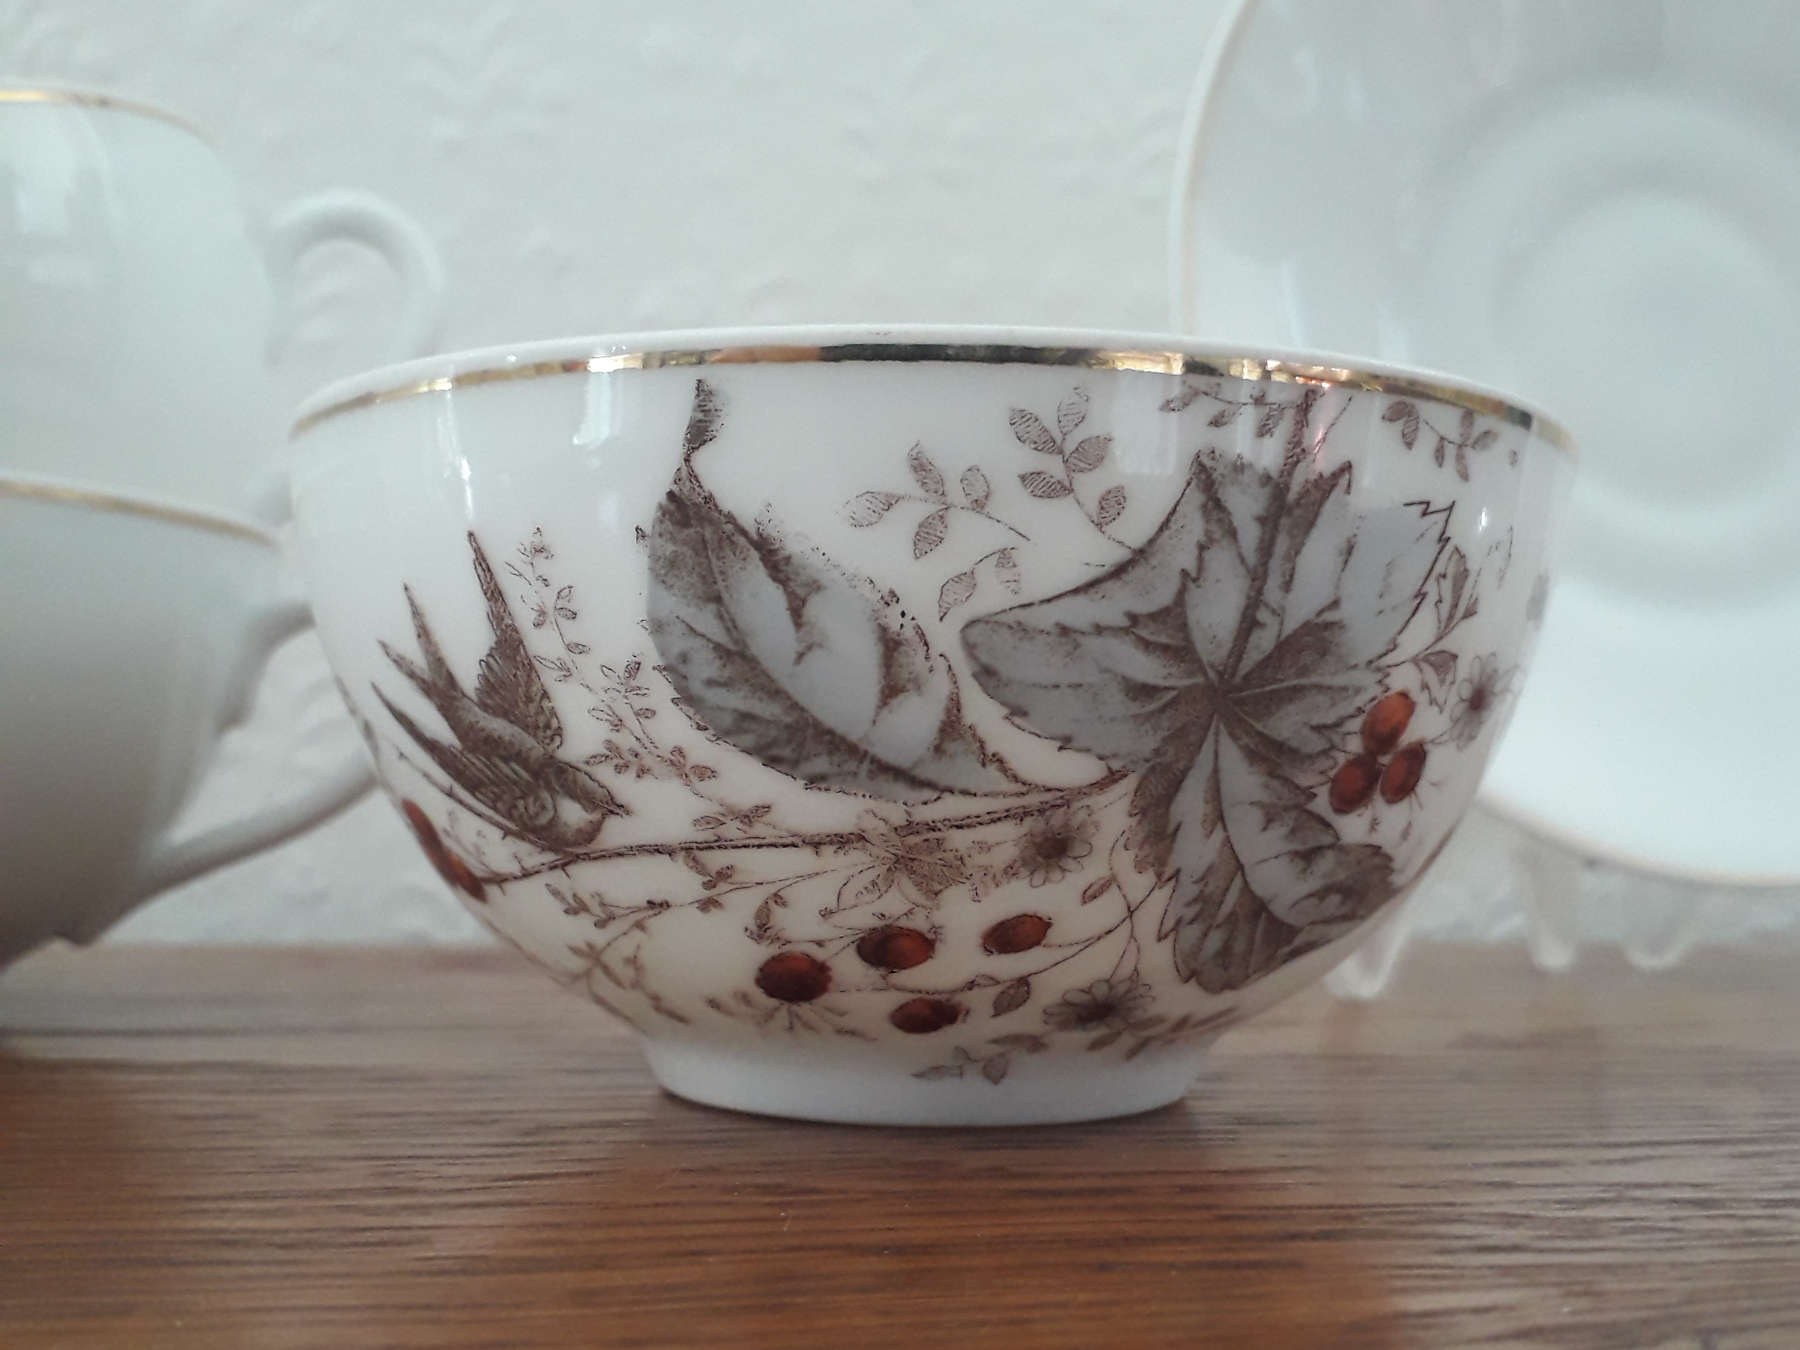 Porsgrund chocolate cup with saucer with bird on rowan. Leaves, flowers and red fruits.